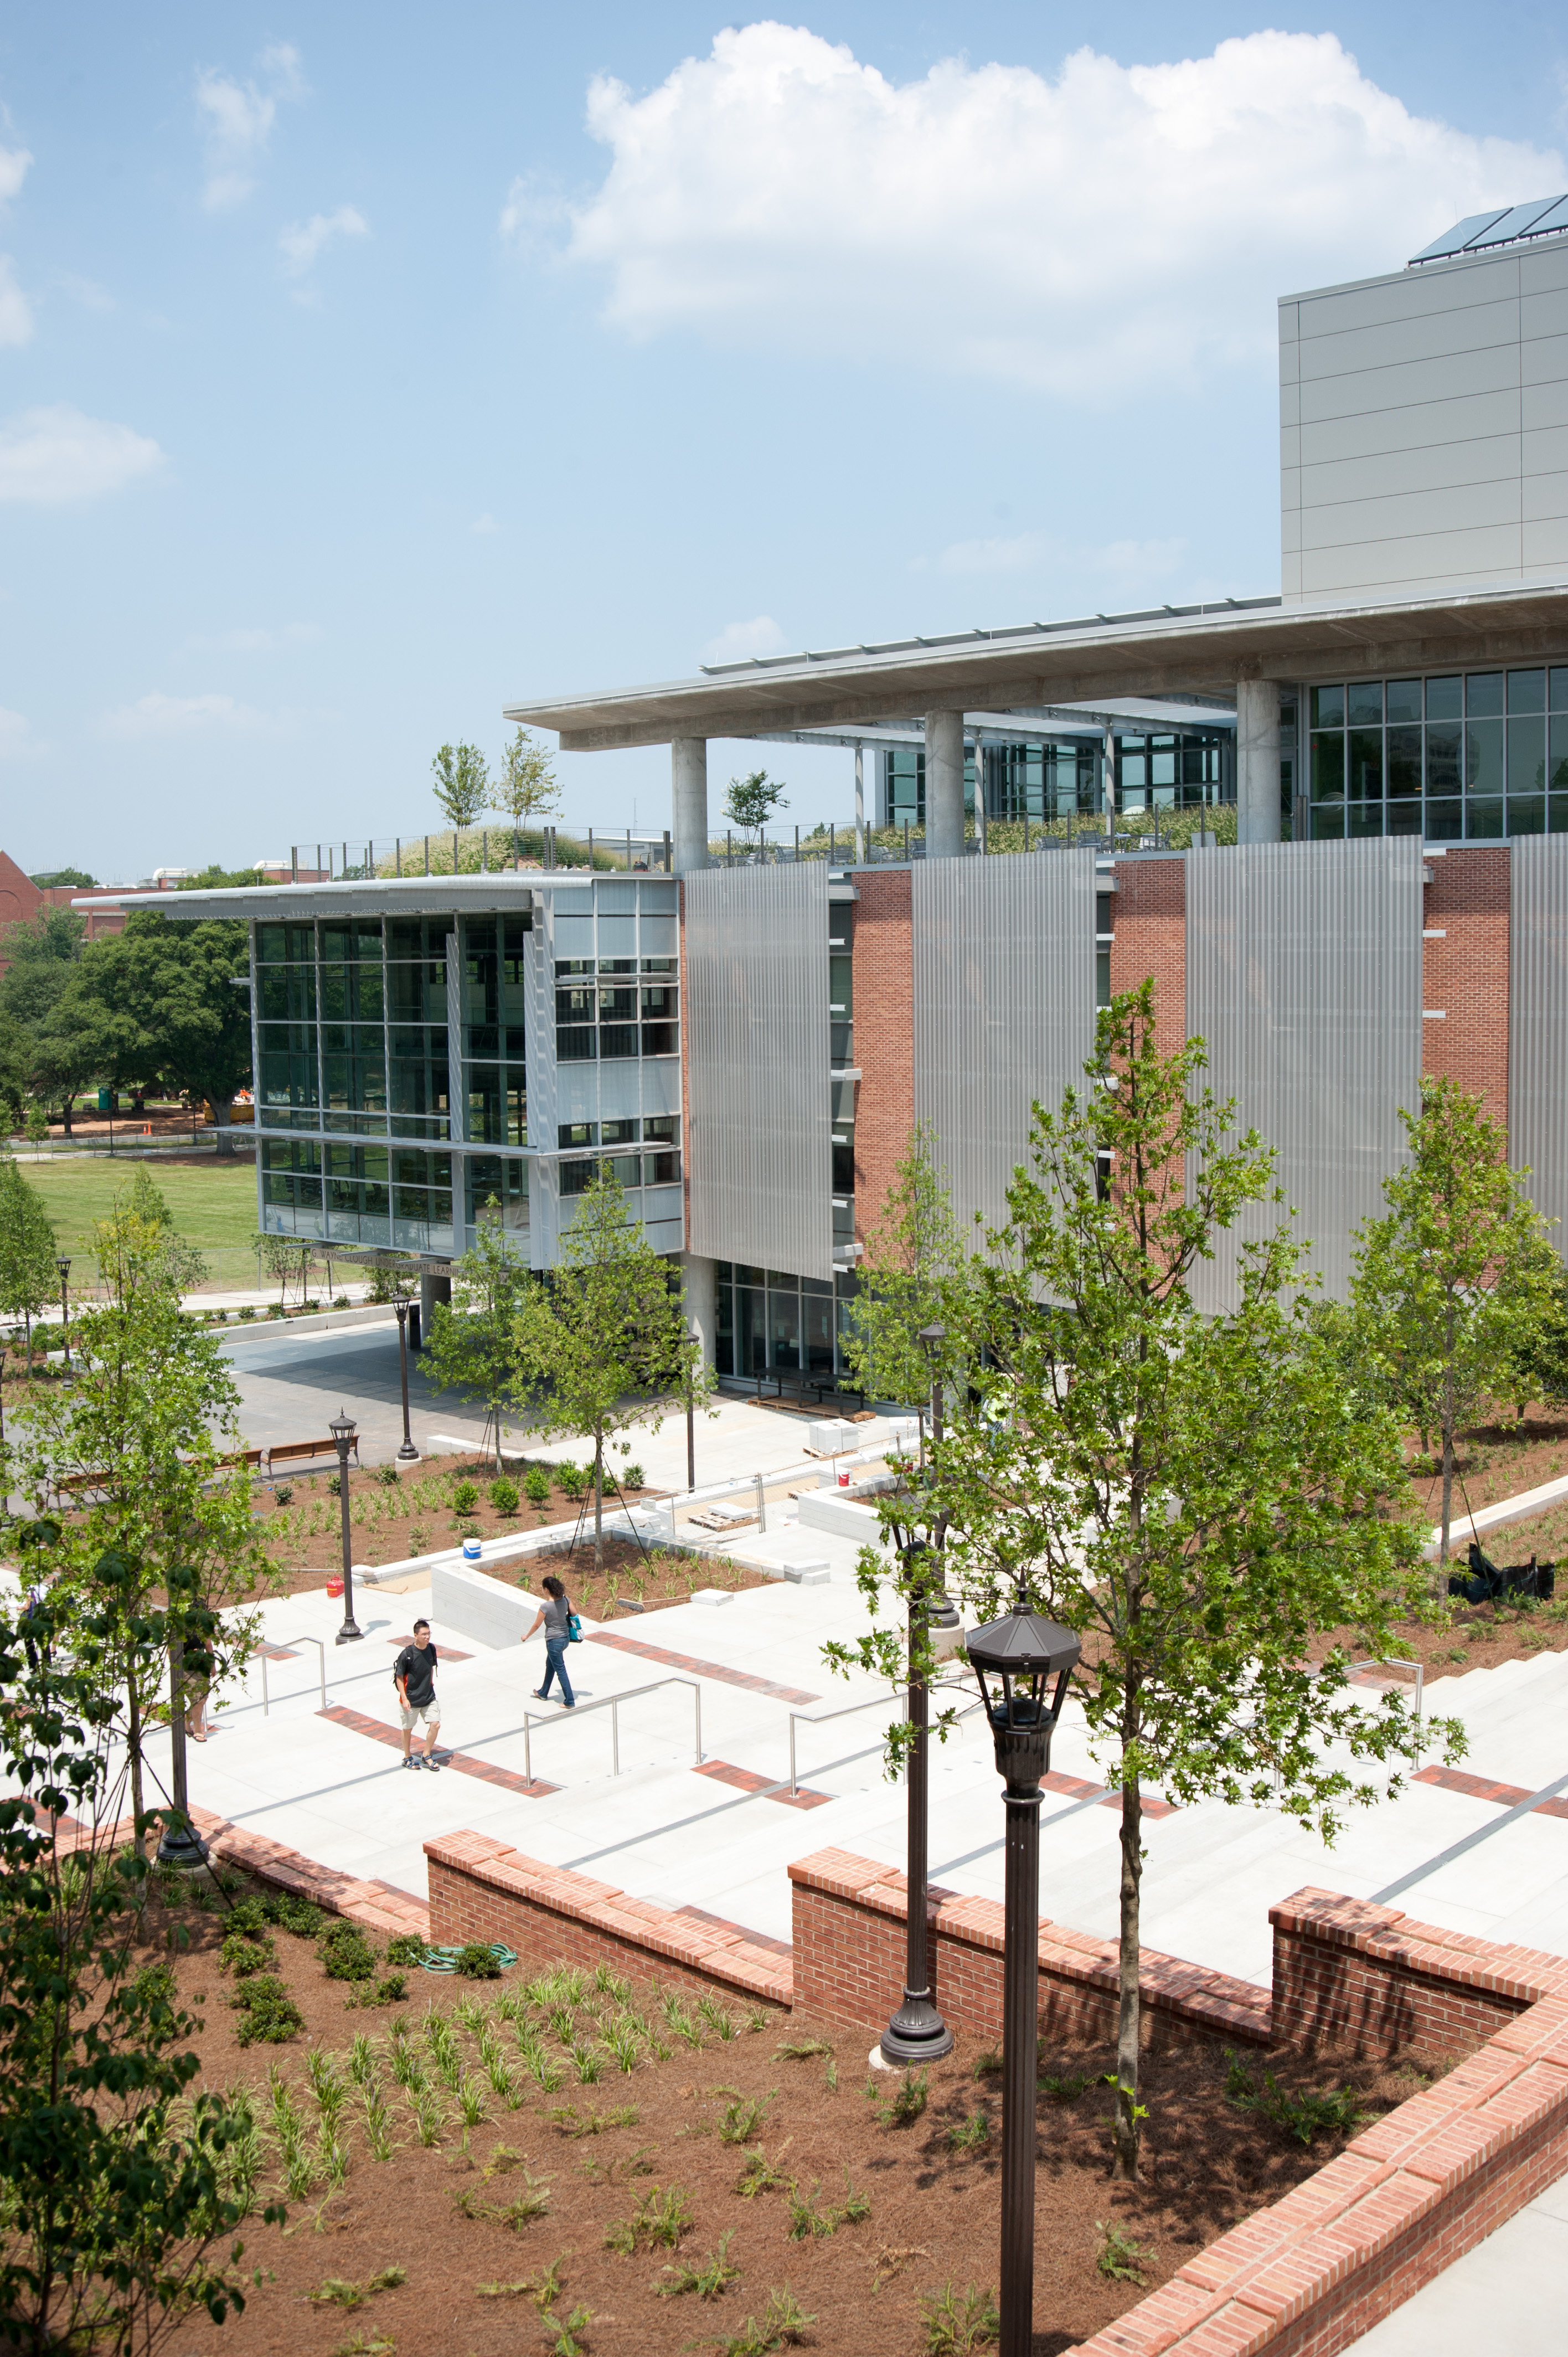 The G. Wayne Clough Undergraduate Learning Commons is a 220,000-square-foot, sustainably designed academic facility intended to enrich undergraduates’ academic environment and present innovative learning opportunities. The new facility, which adjoins to the Price Gilbert Library in the crossroads of Tech’s campus, opened at the start of the fall 2011 semester.